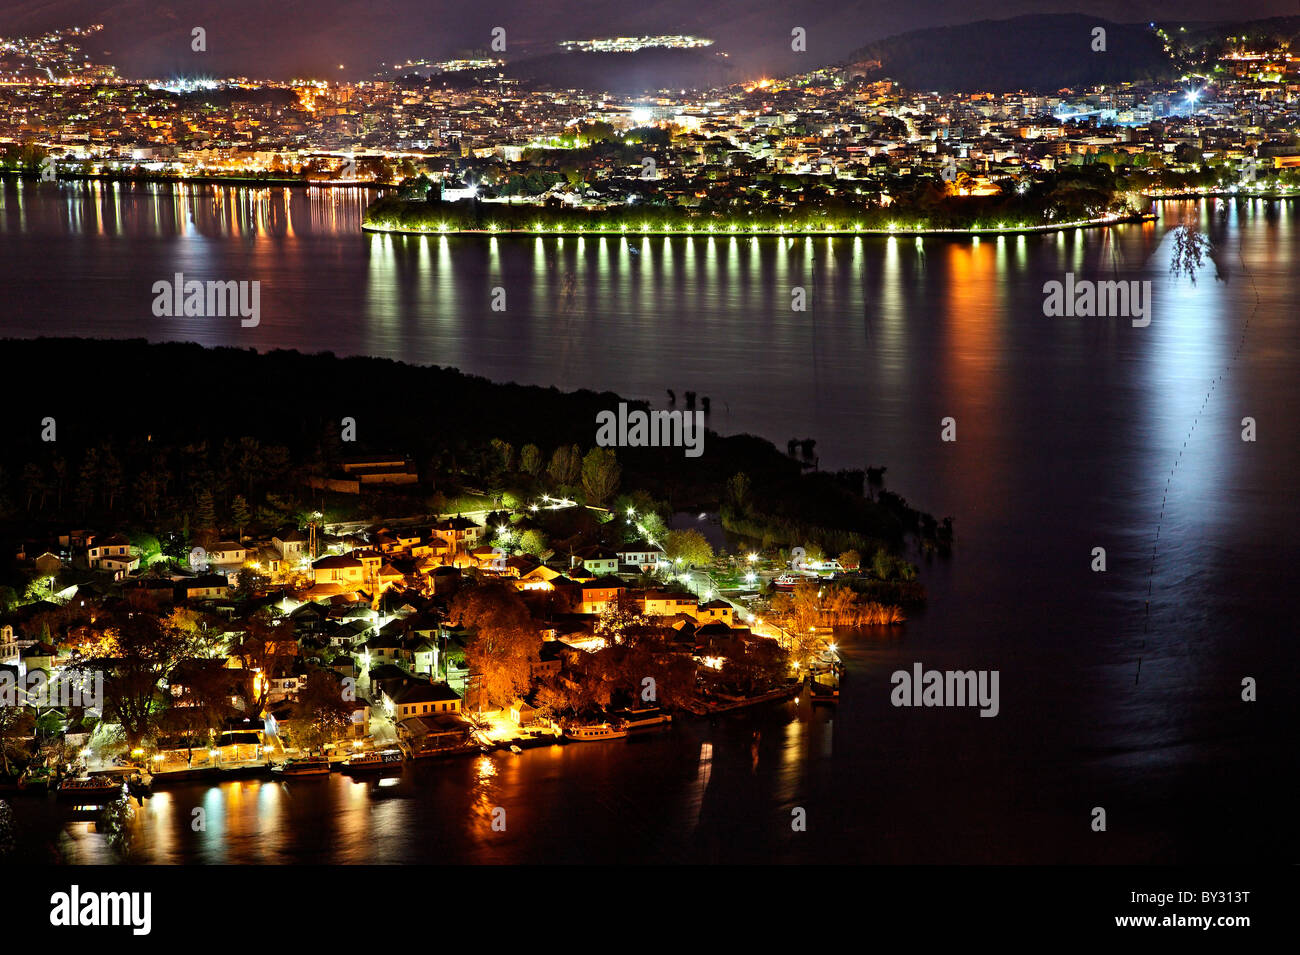 Panoramic night view of Ioannina town, its lake ('Pamvotis' or 'Pamvotida'), the islet of the lake and its village. Greece Stock Photo